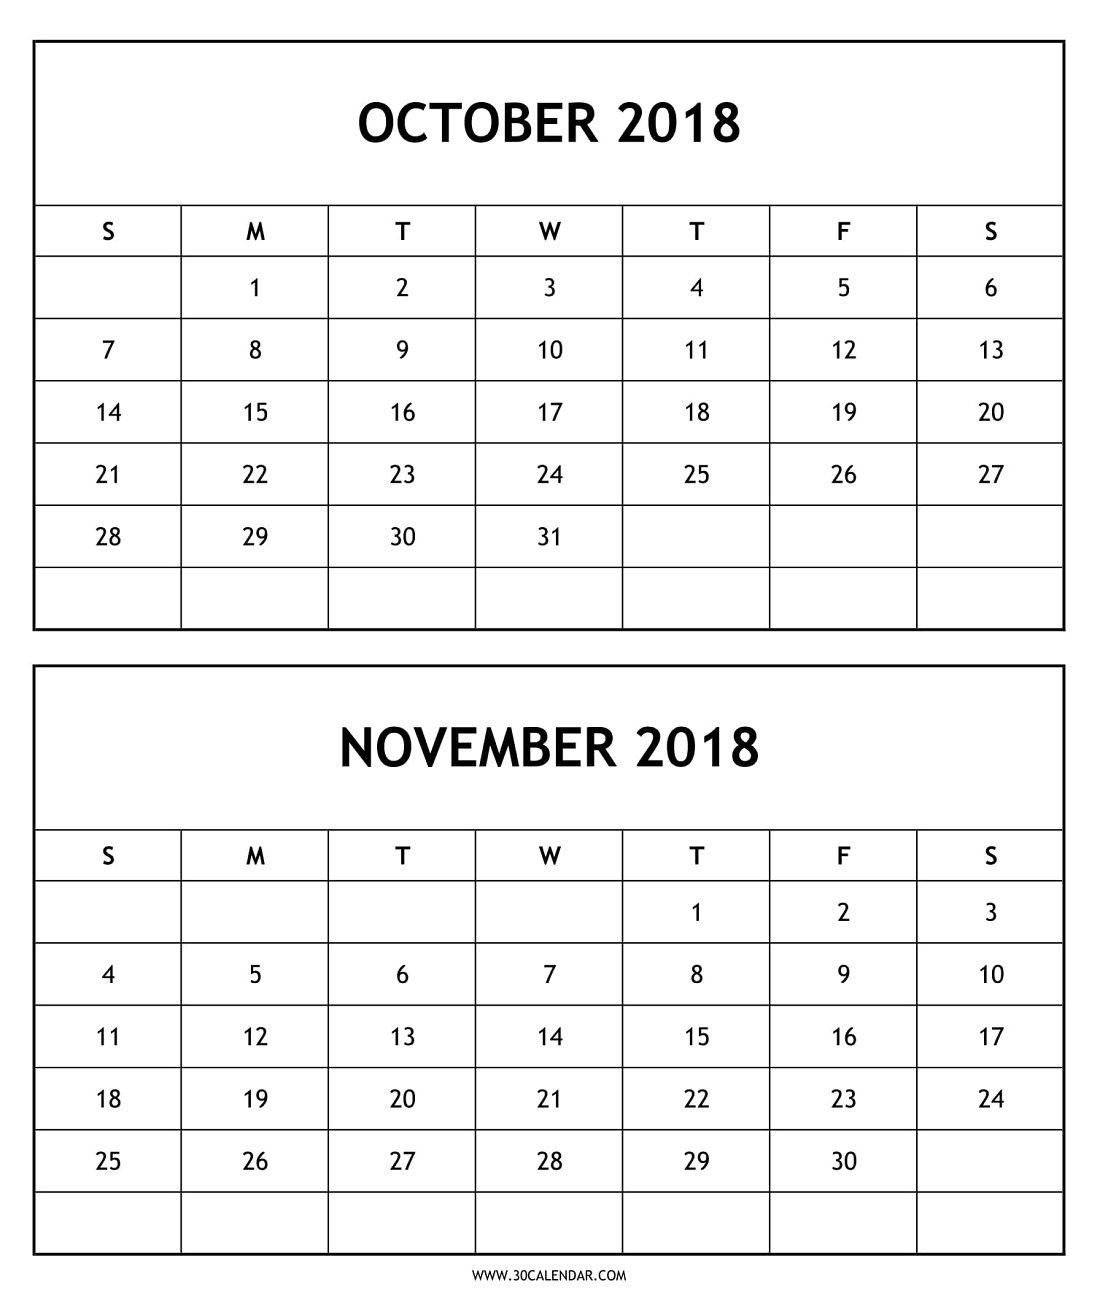 Blank Two Month Calendar 2018 October November To Print throughout Blank Two Month Calendar